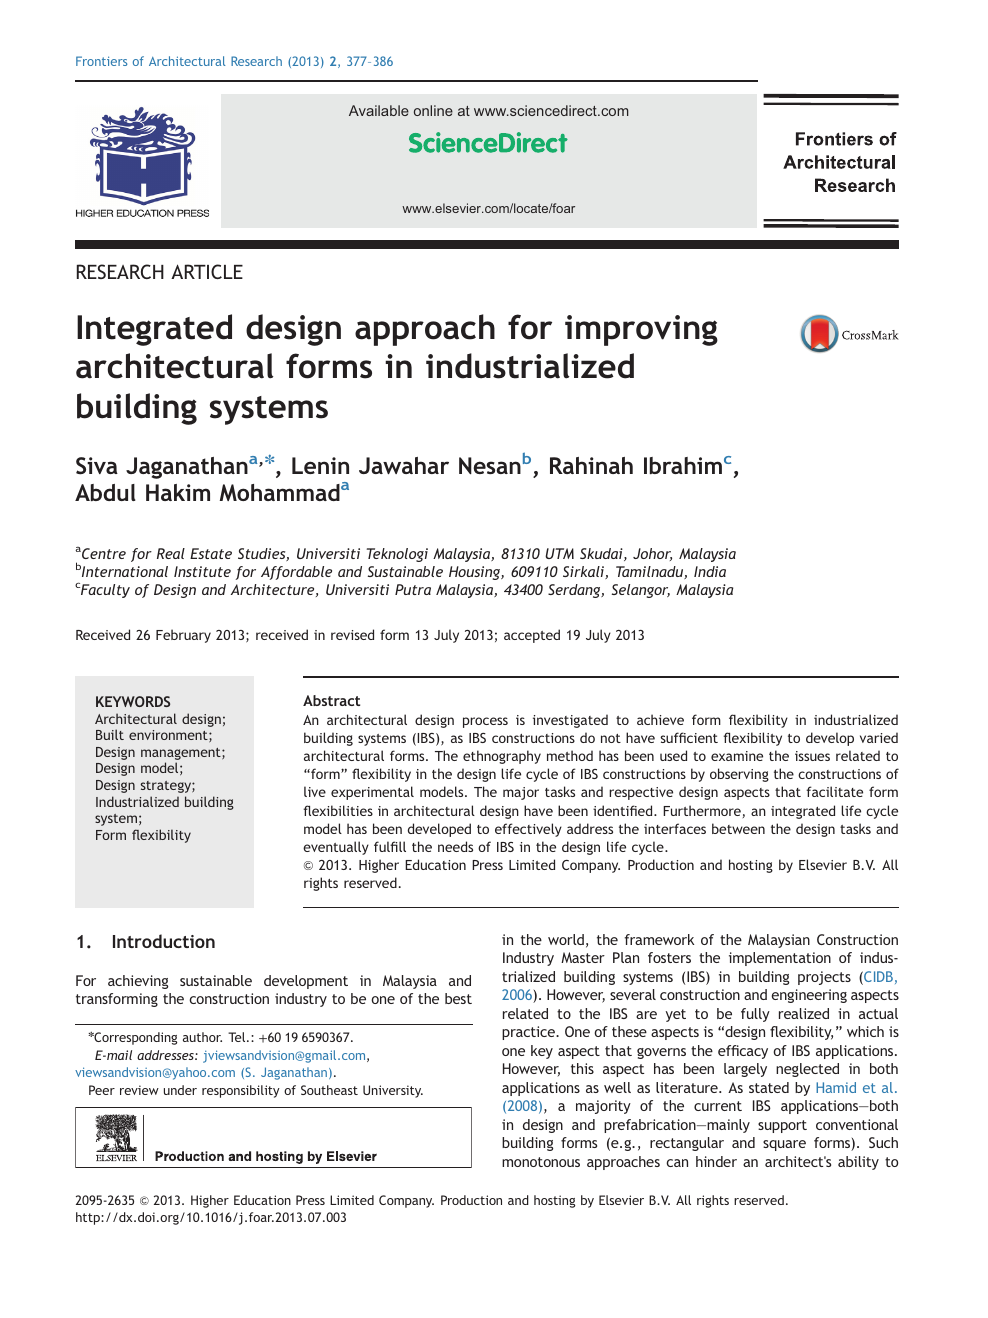 Integrated Design Approach For Improving Architectural Forms In Industrialized Building Systems Topic Of Research Paper In Mechanical Engineering Download Scholarly Article Pdf And Read For Free On Cyberleninka Open Science Hub